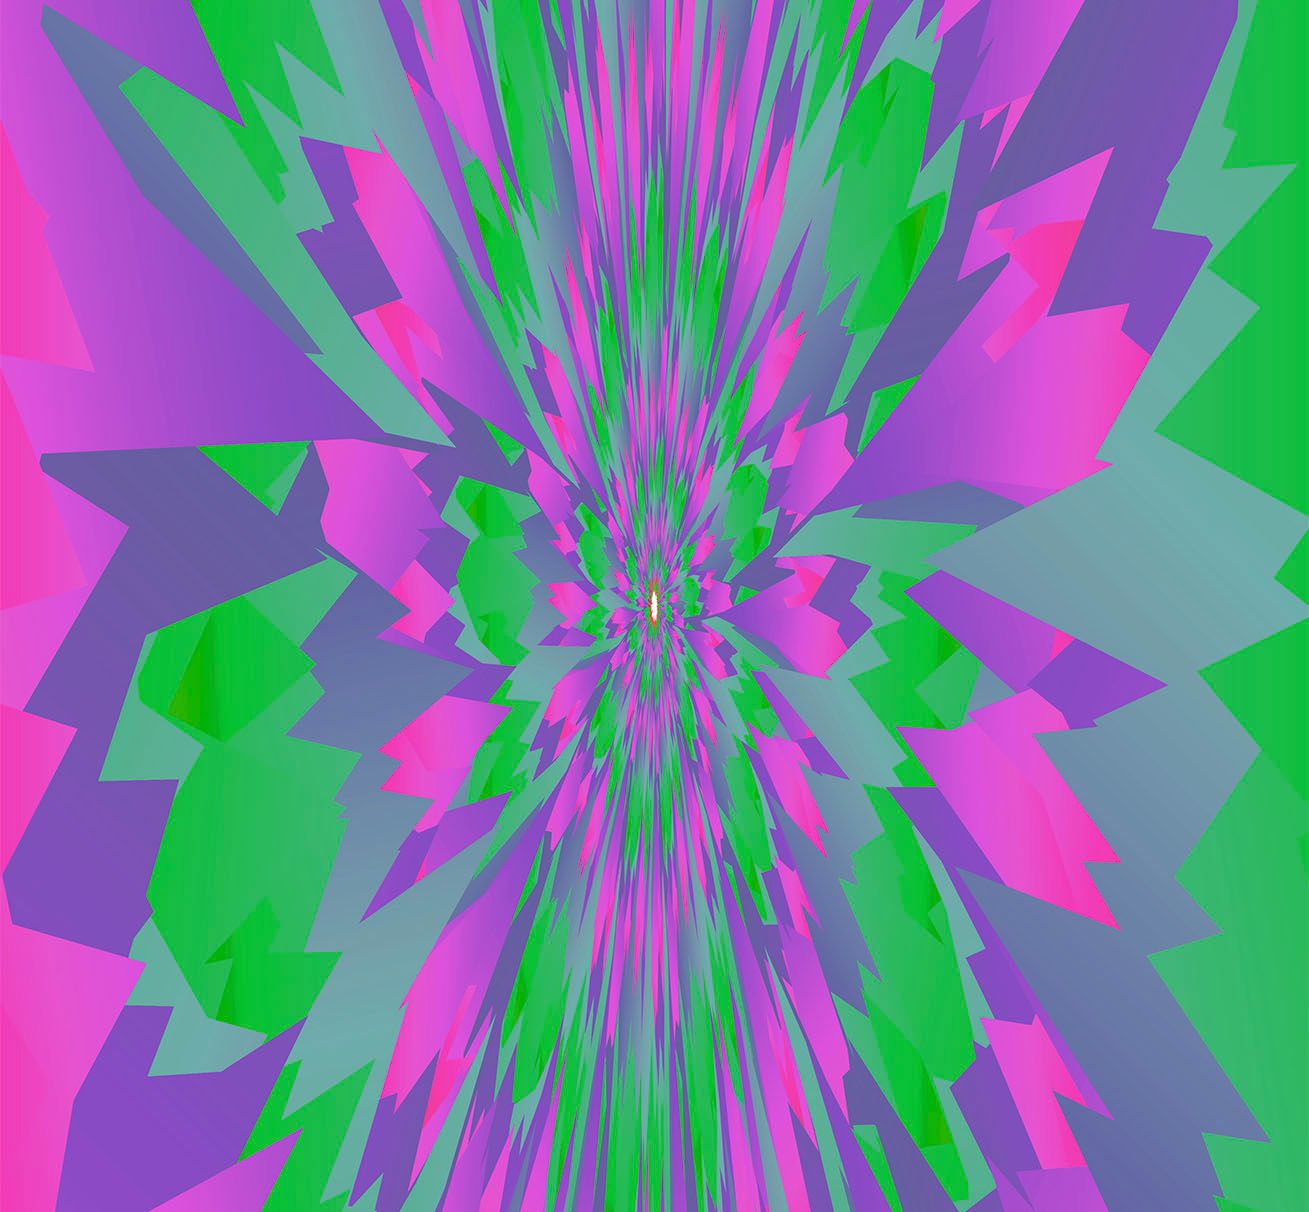 Psychedelic Green/Fuchsia ShowSocx